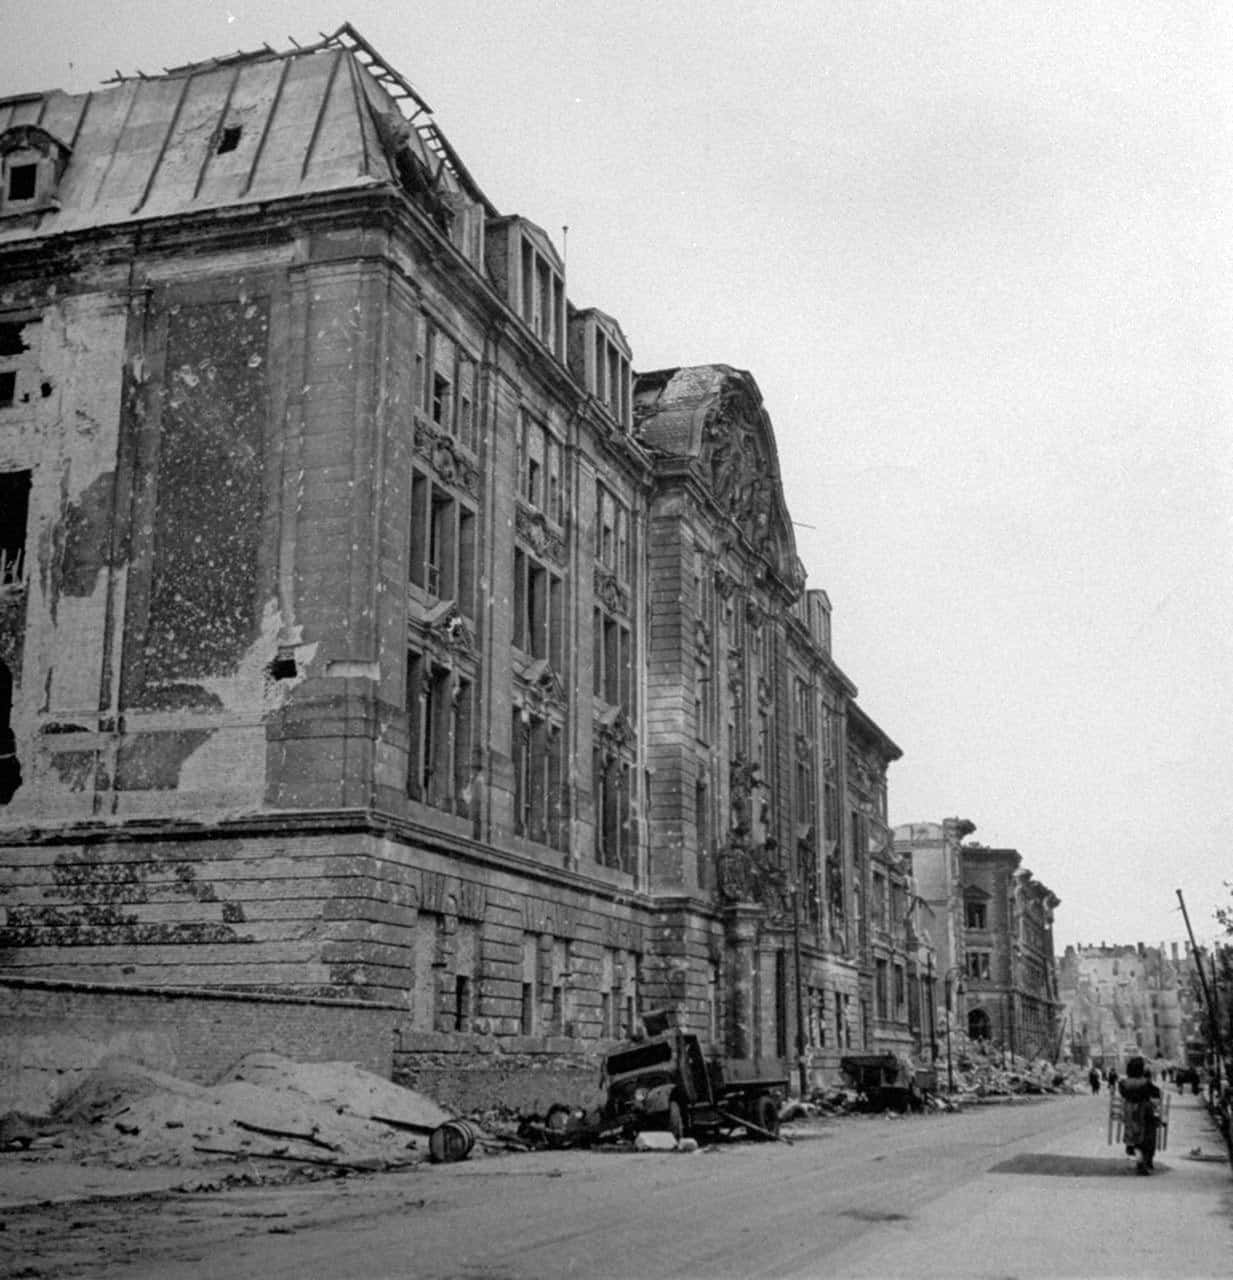 The SS Gestapo headquarters on Prinz-Albrecht-Strasse after the Battle of Berlin